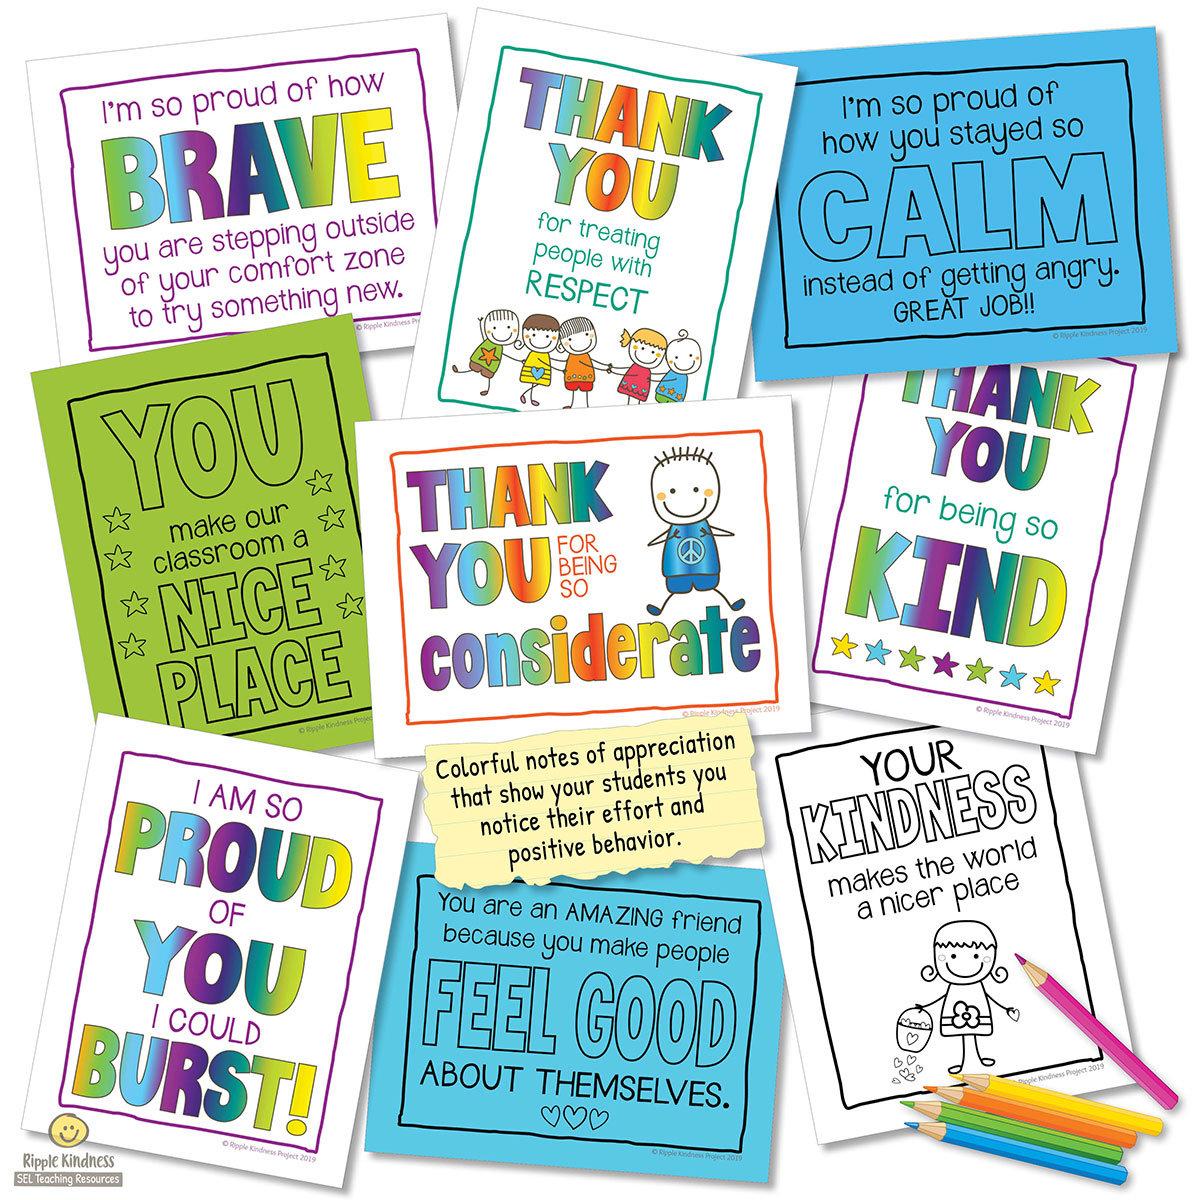 A Selection Of Student Encouragement Notes To Improve Self-Esteem. Incentives For Good Behavior And Kindness By Ripple Kindness Project